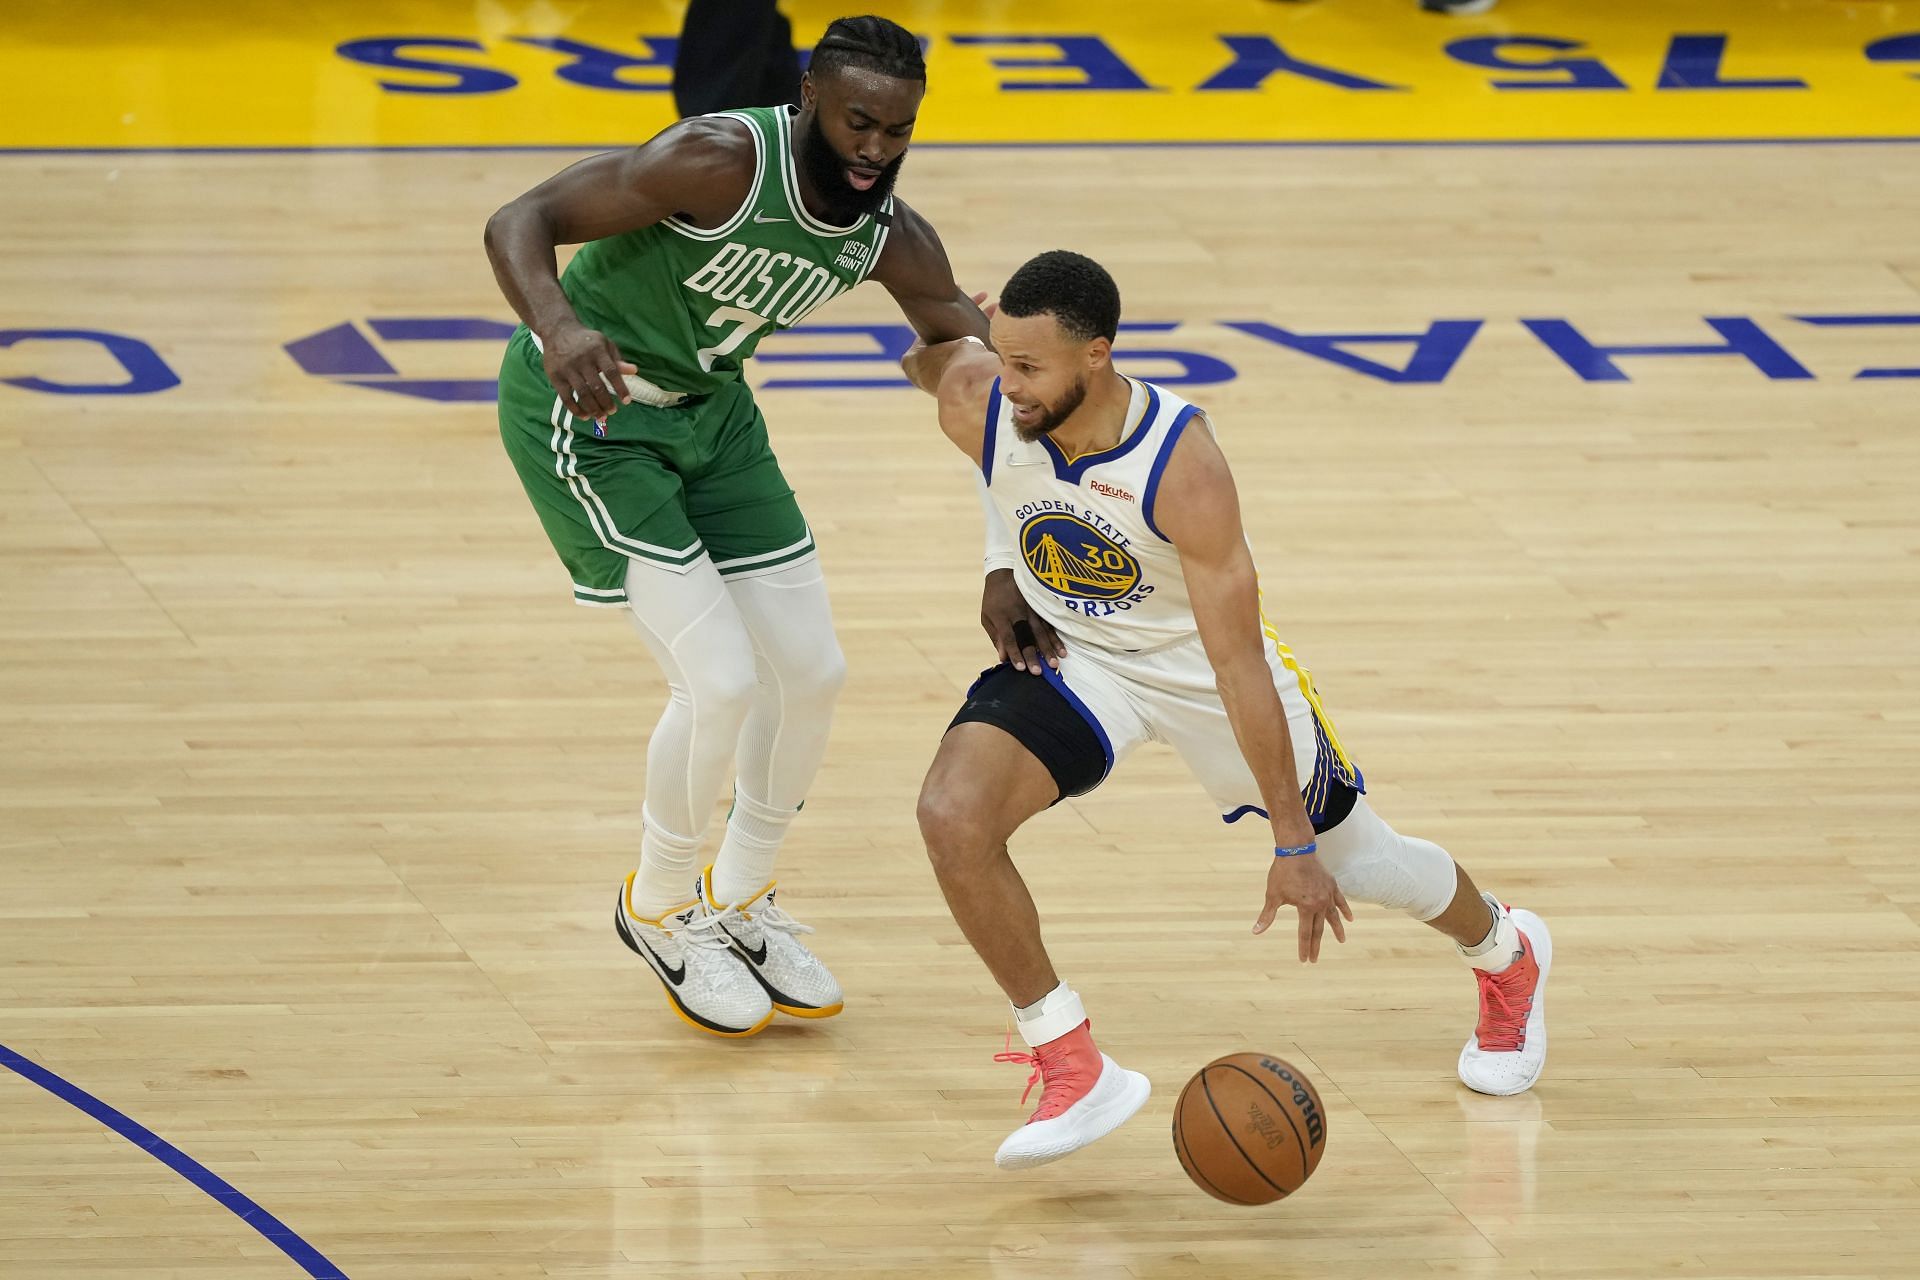 The 2022 NBA Finals has moved to Boston where the Celtics will play two games. [Image Credit: Getty Images]